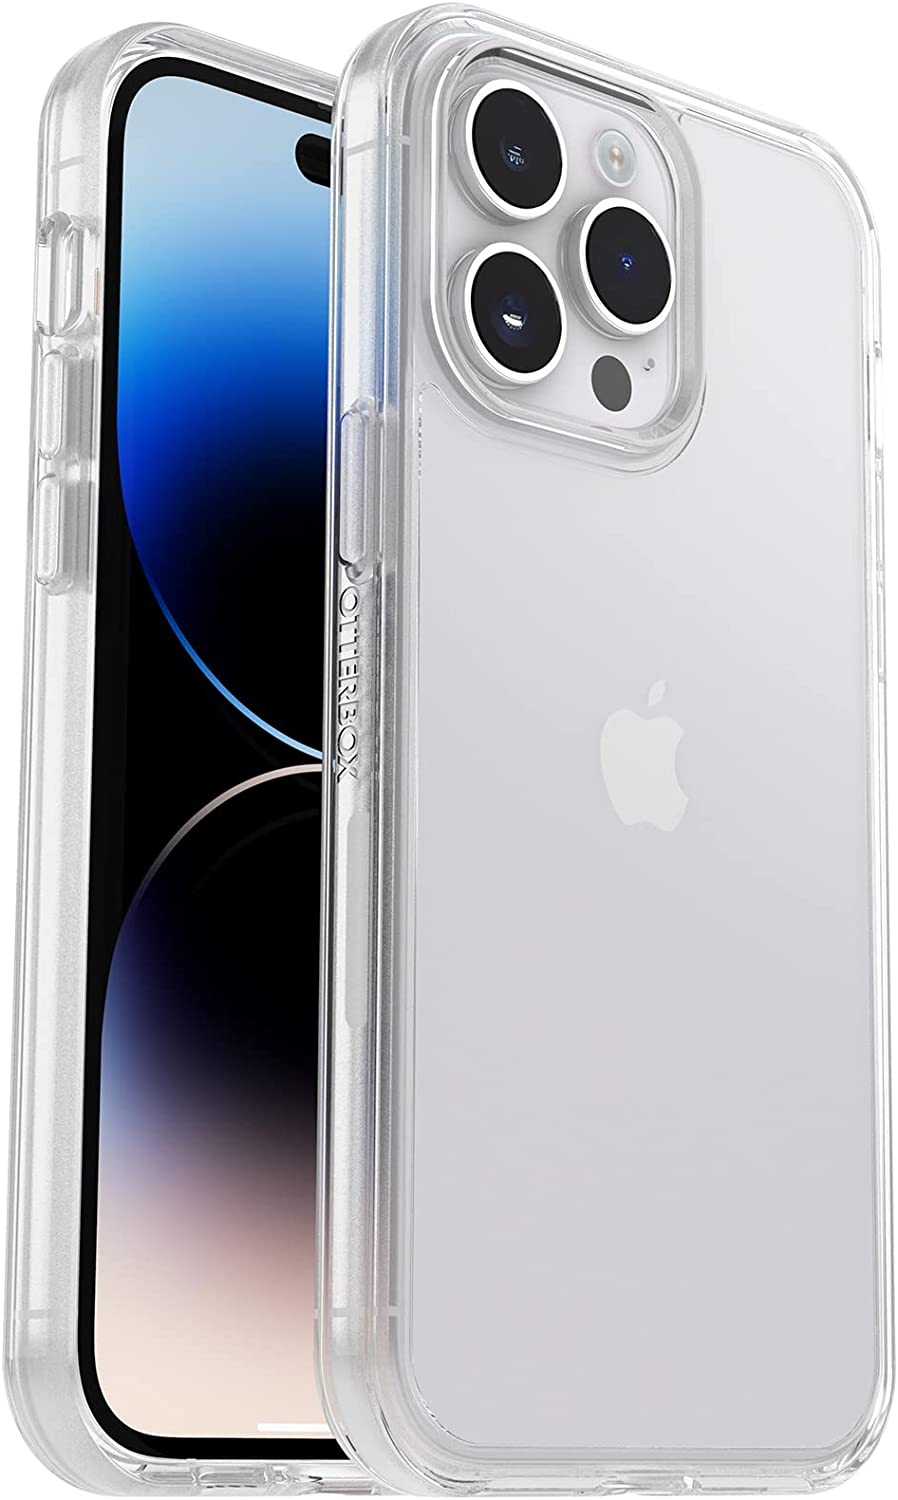 OtterBox SYMMETRY SERIES Clear Case for iPhone 14 Pro Max - Clear (Certified Refurbished)